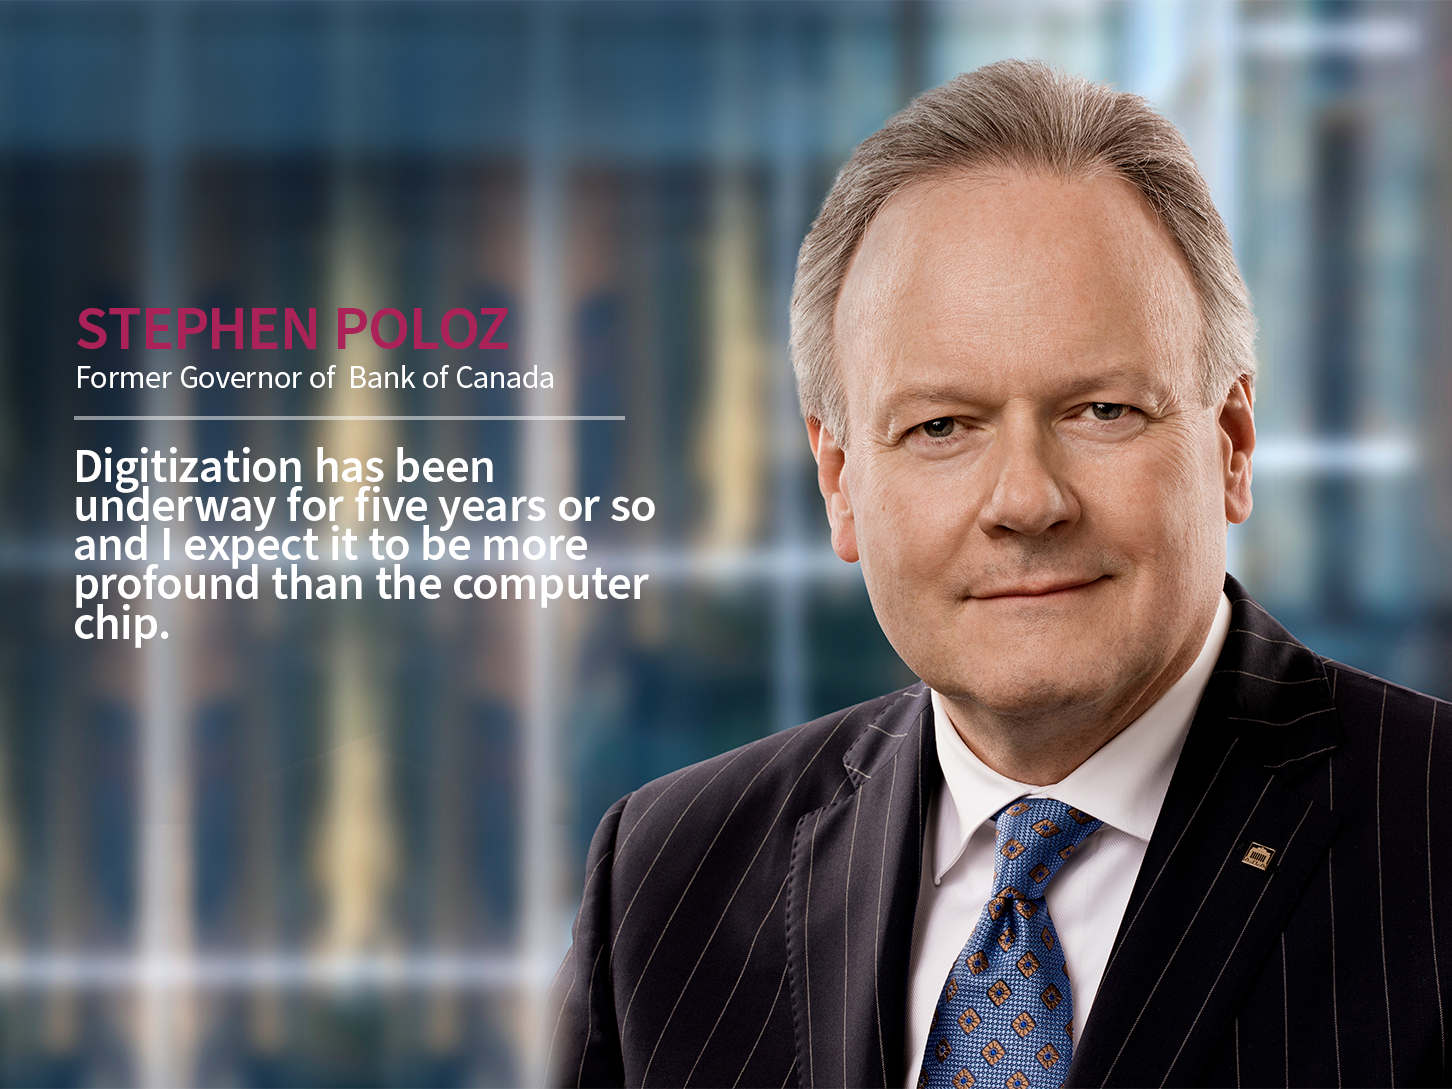 Stephen Poloz talks to Pender about his new book, The Next Age of Uncertainty Part 1